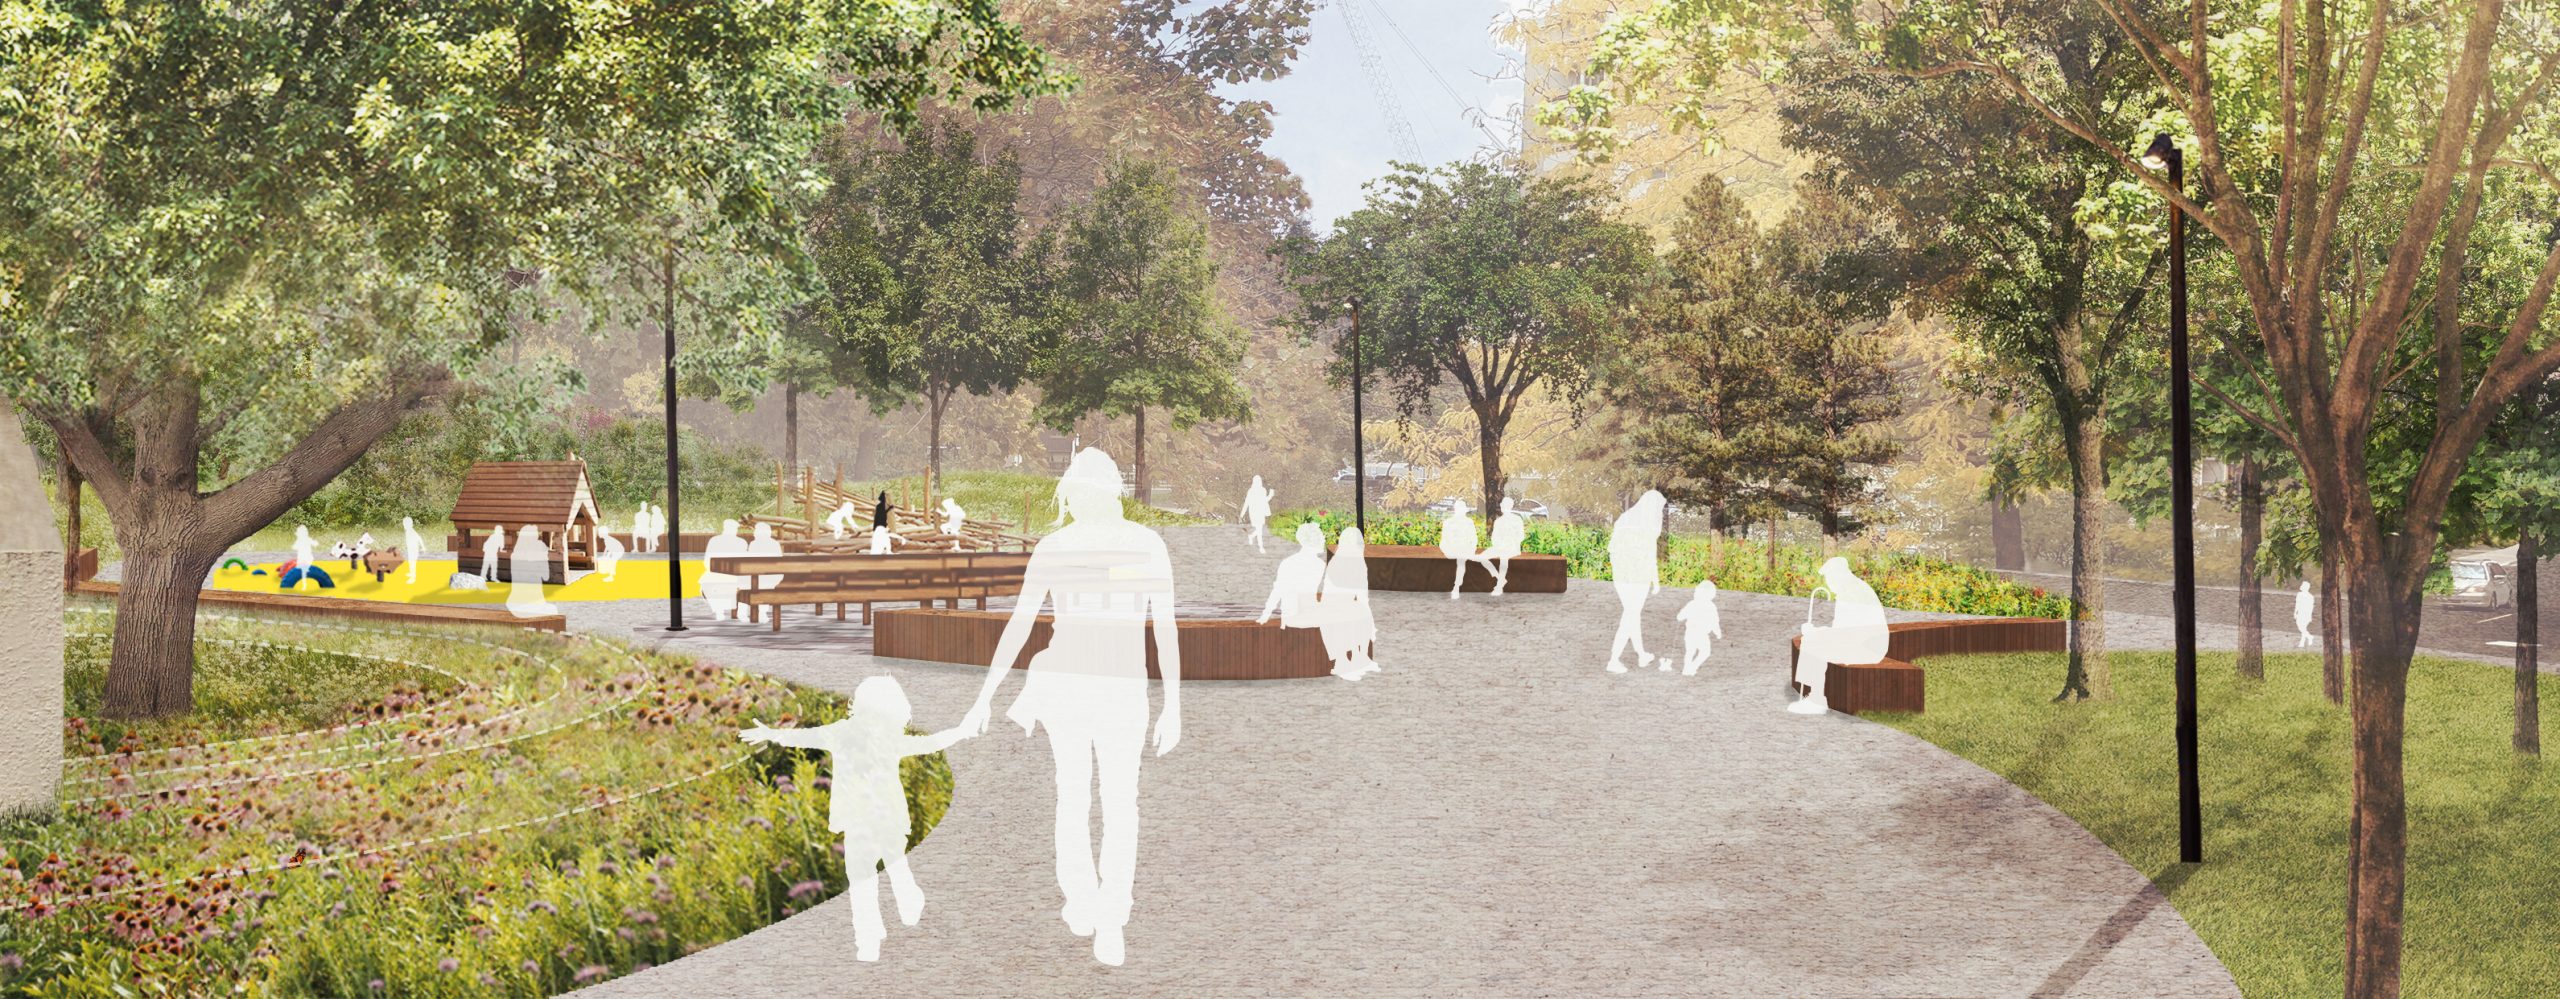 Illustrative image showing the parkette entrance from the north, looking southeast through the parkette. A silhouette of a person and their child are walking towards the entrance, with a slightly raised topography, meadow and tree to the left. Further into the distance, people are using a variety of seating types including platforms, seatwalls, benches, and picnic tables.